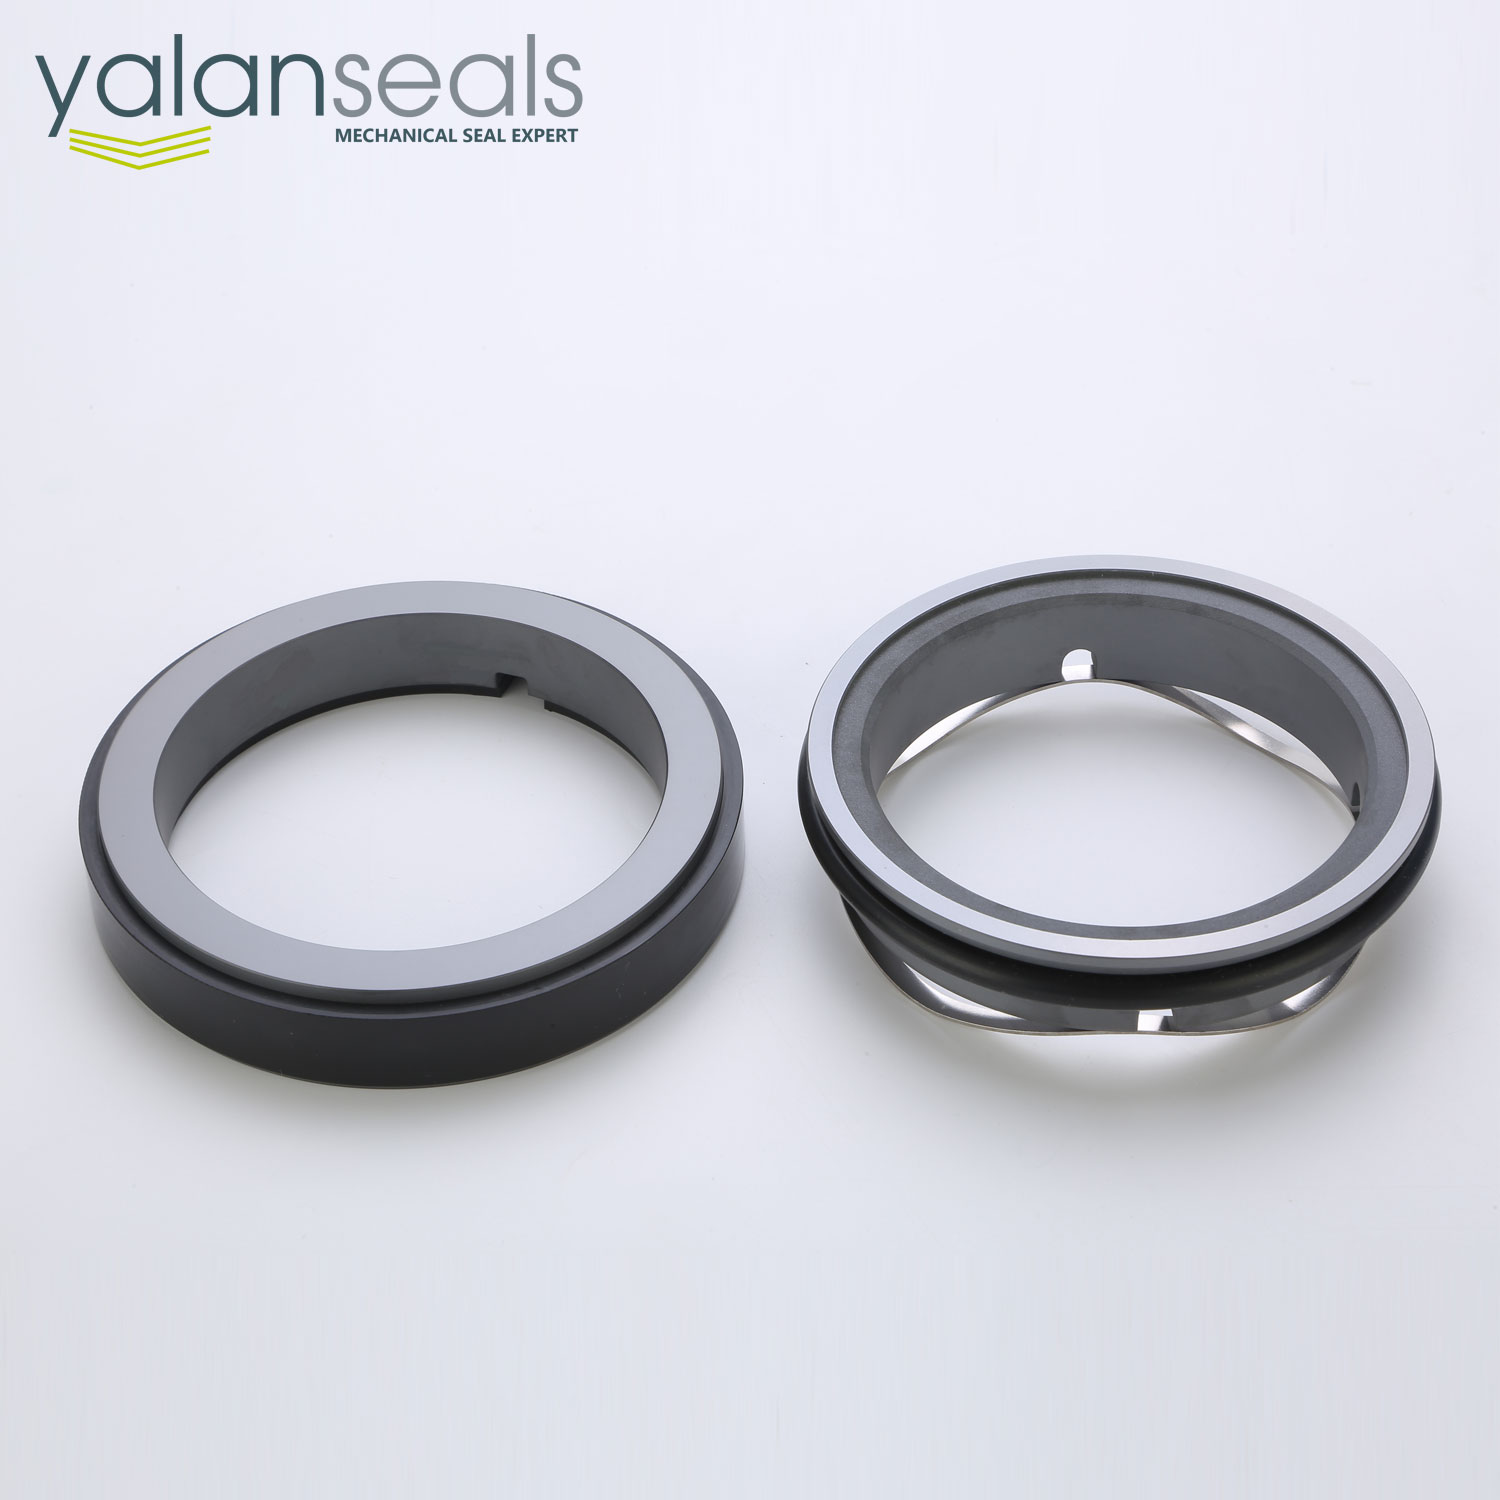 YALAN 45409-A-09 Wave Spring Mechanical Seal for Beverage Pumps and Food Mixers